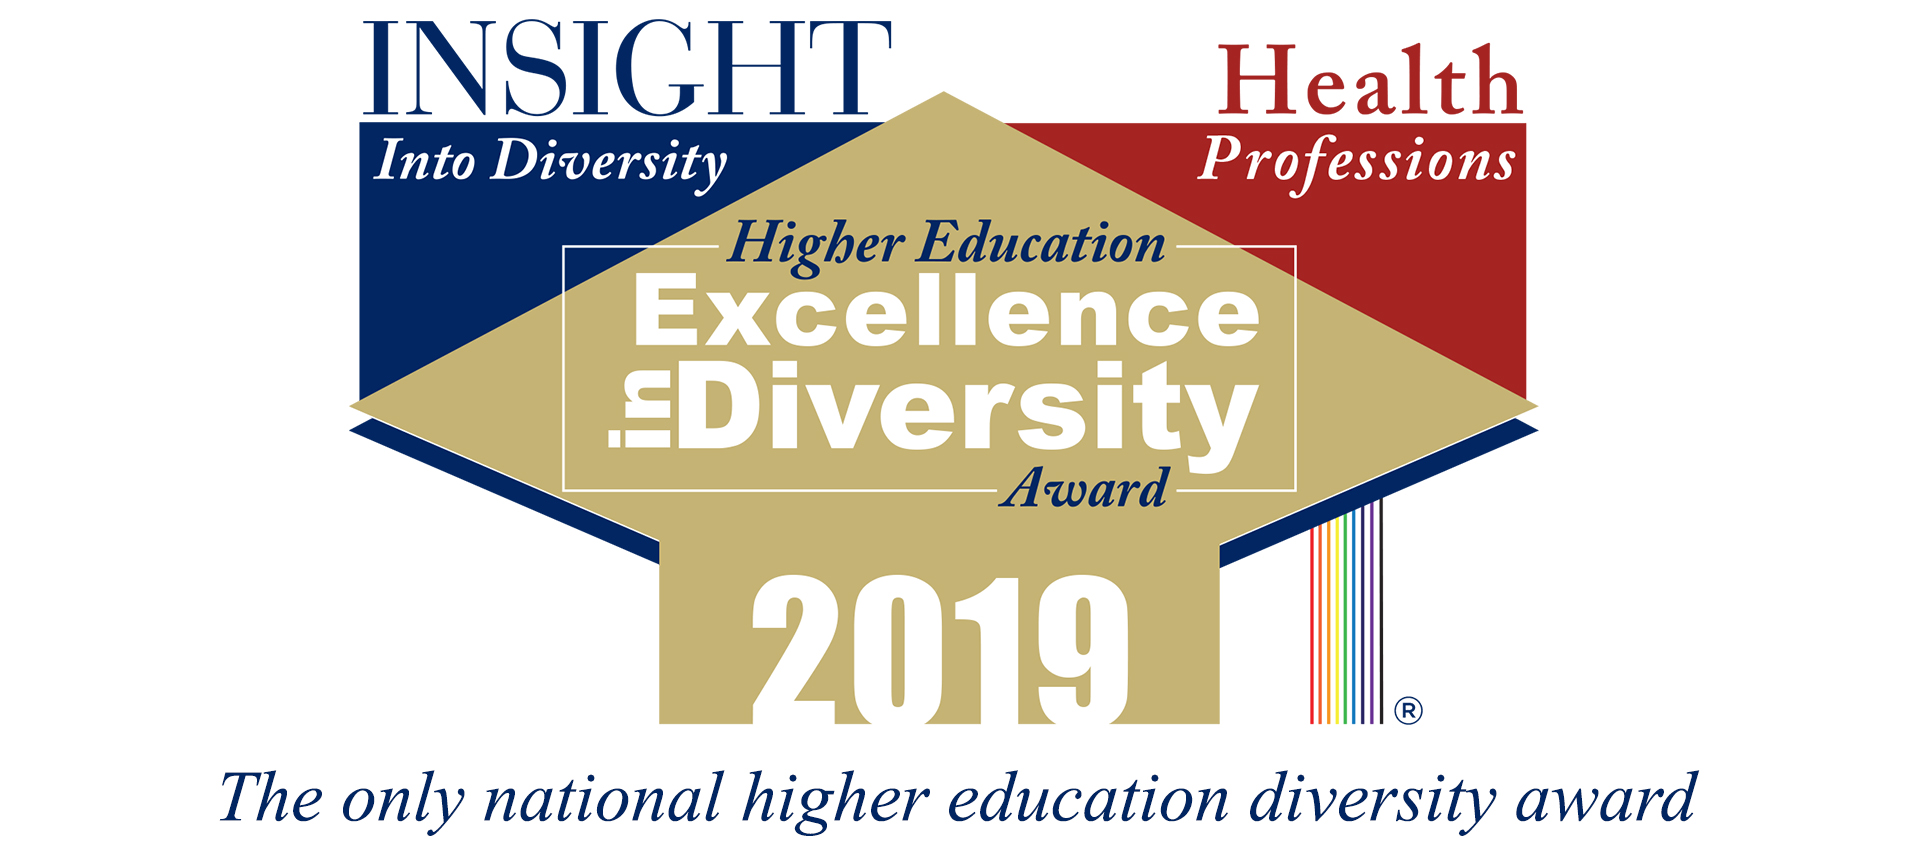 2019 Health Professions Higher Education Excellence in Diversity (HEED) Award